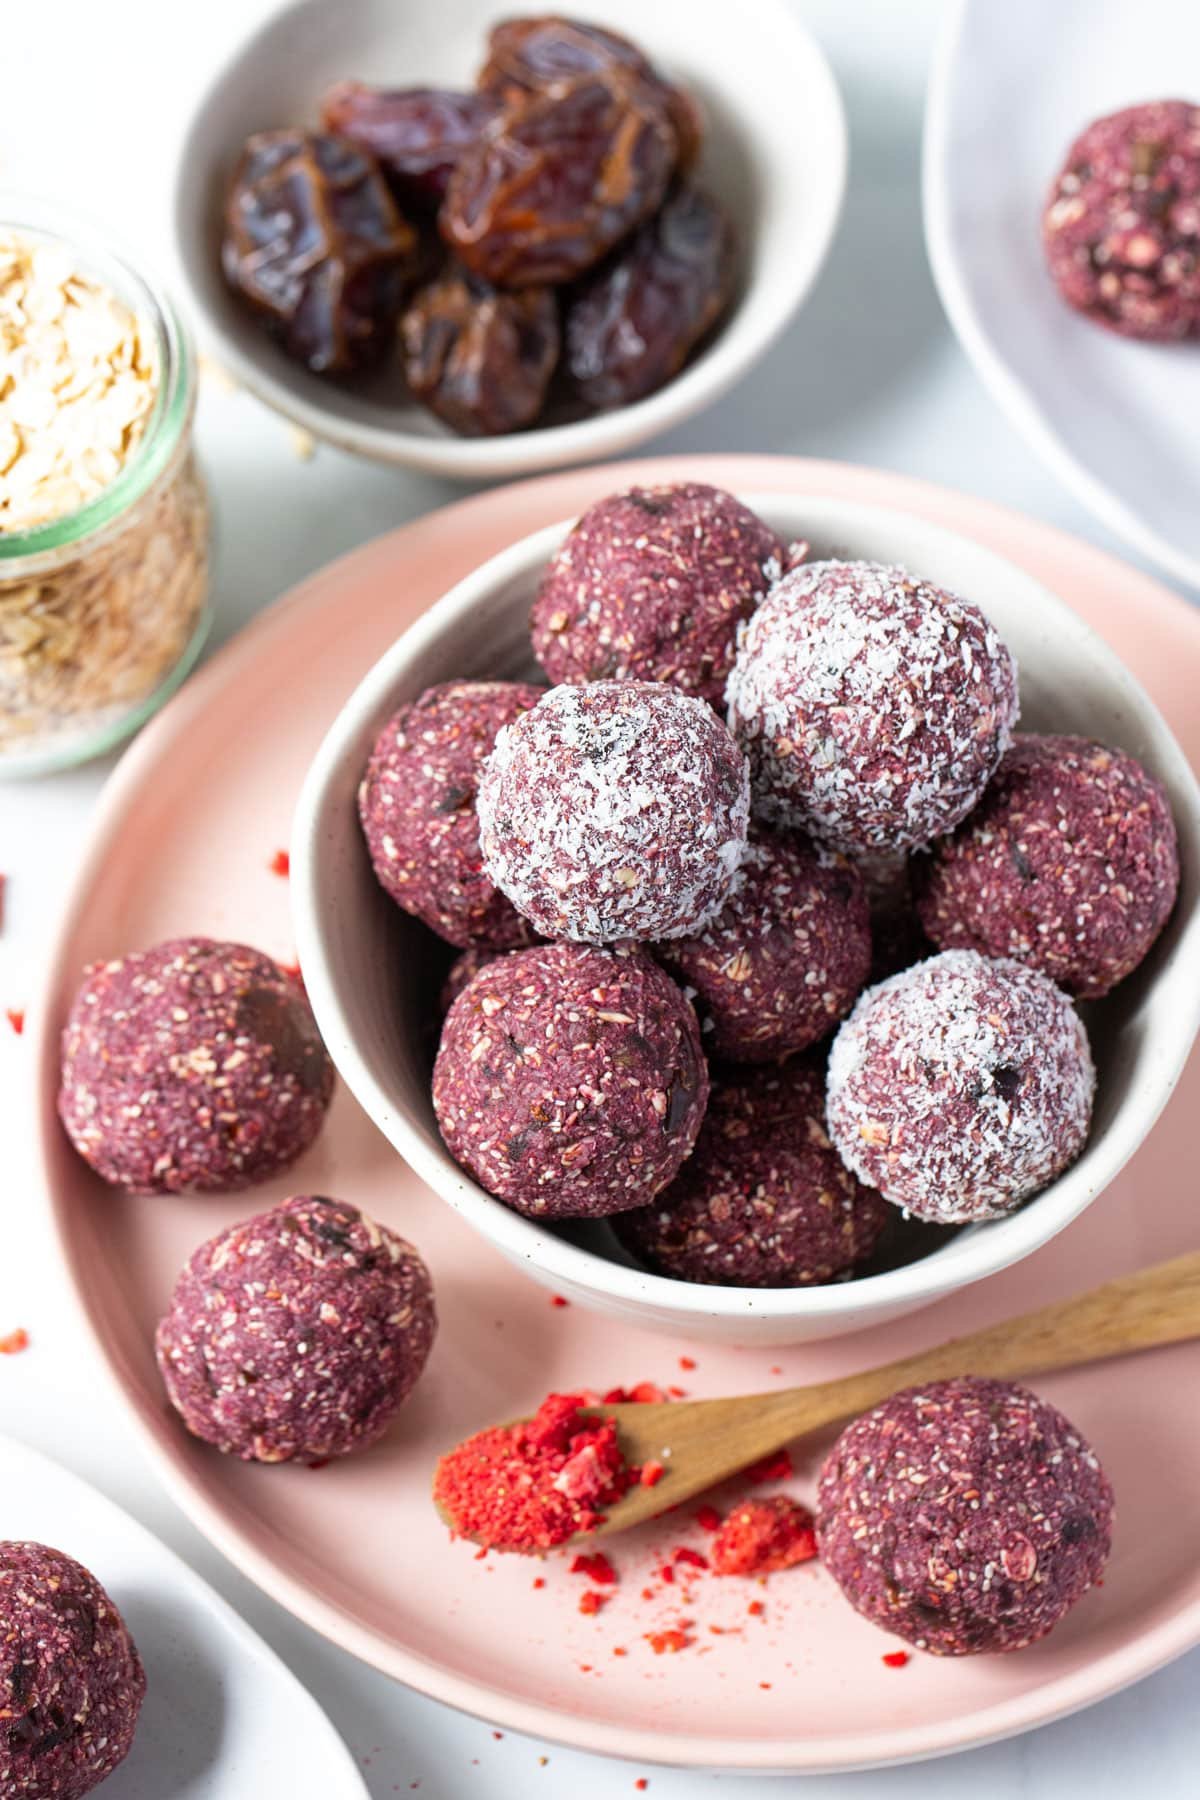 https://www.thecookingcollective.com.au/wp-content/uploads/2022/08/raspberry-bliss-balls.jpg